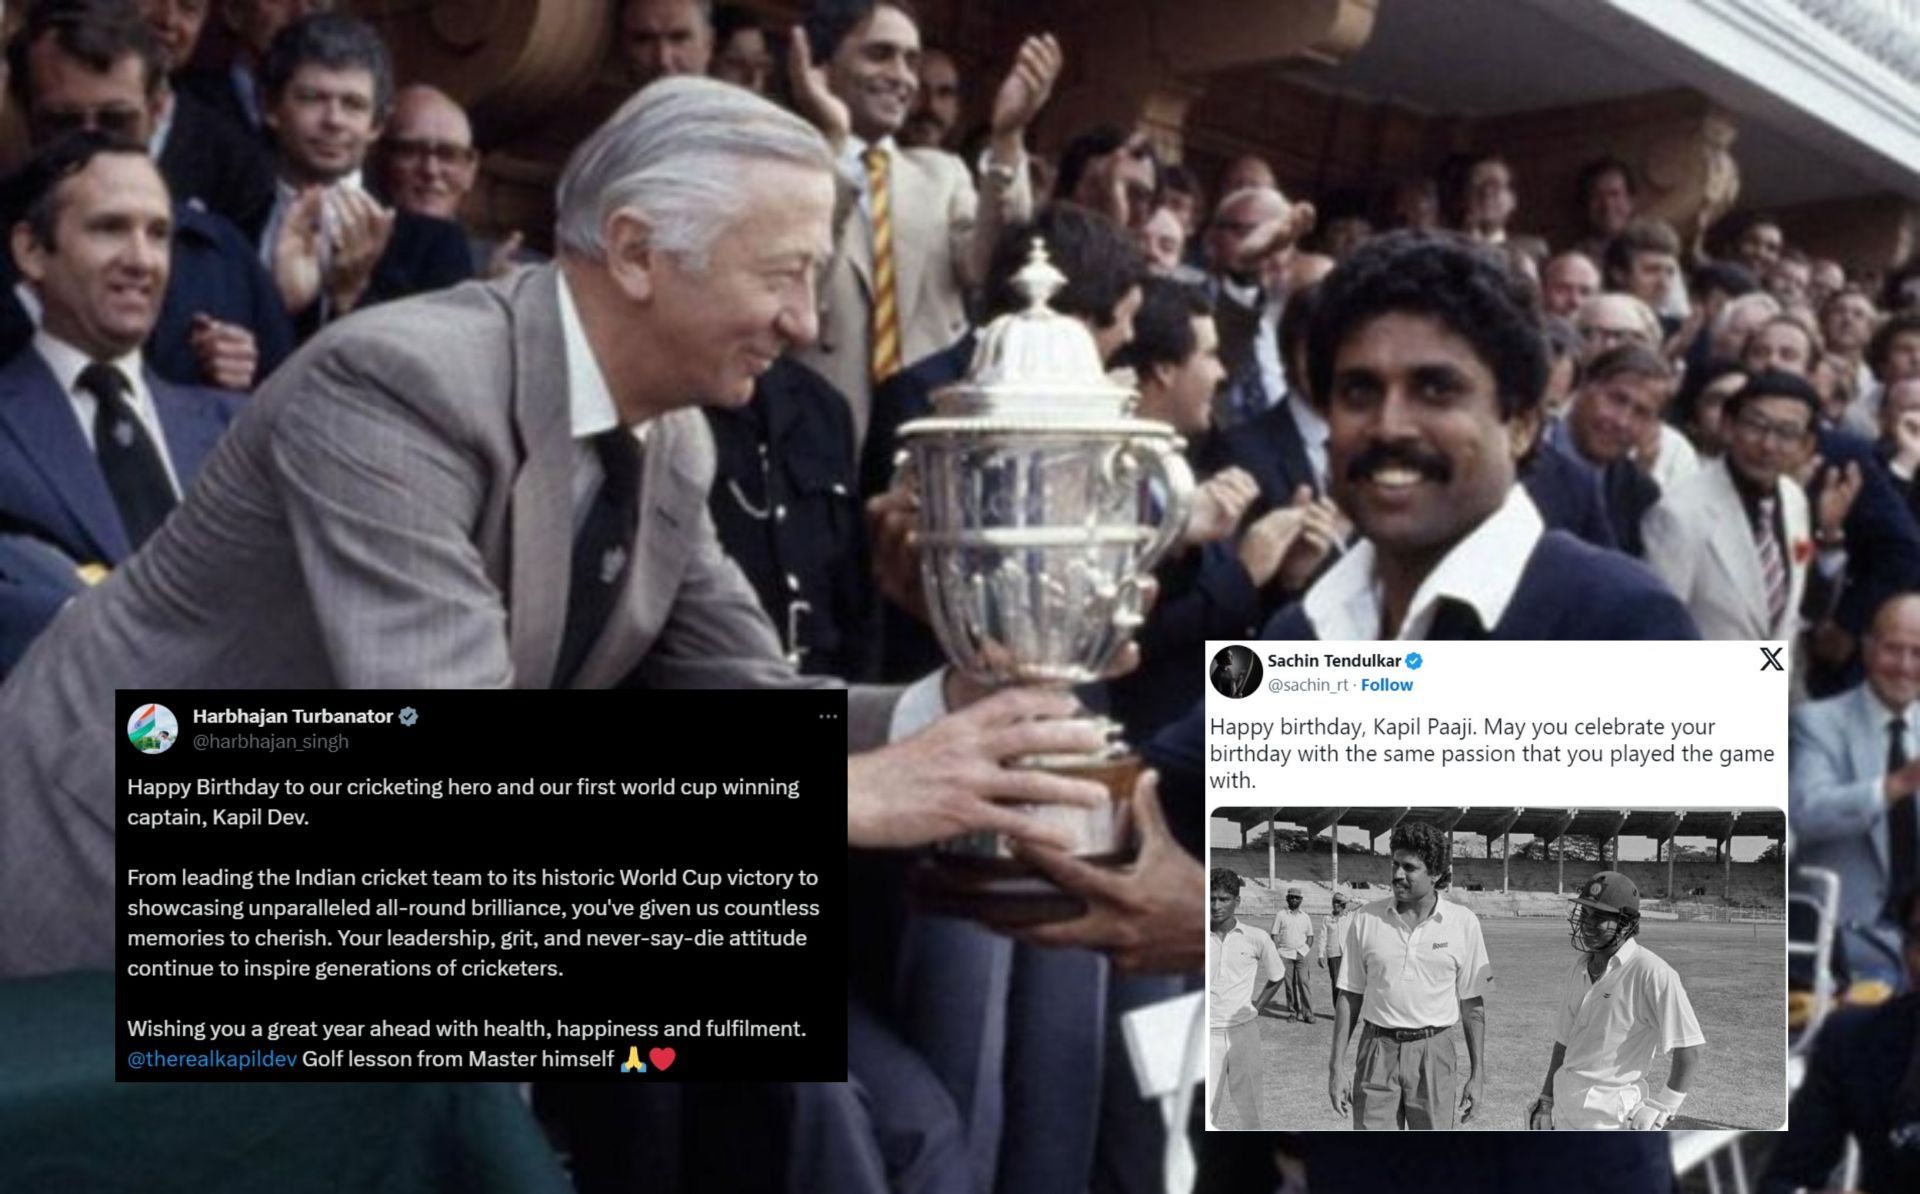 Cricket community and fans wish Kapil Dev on his 65th birthday.